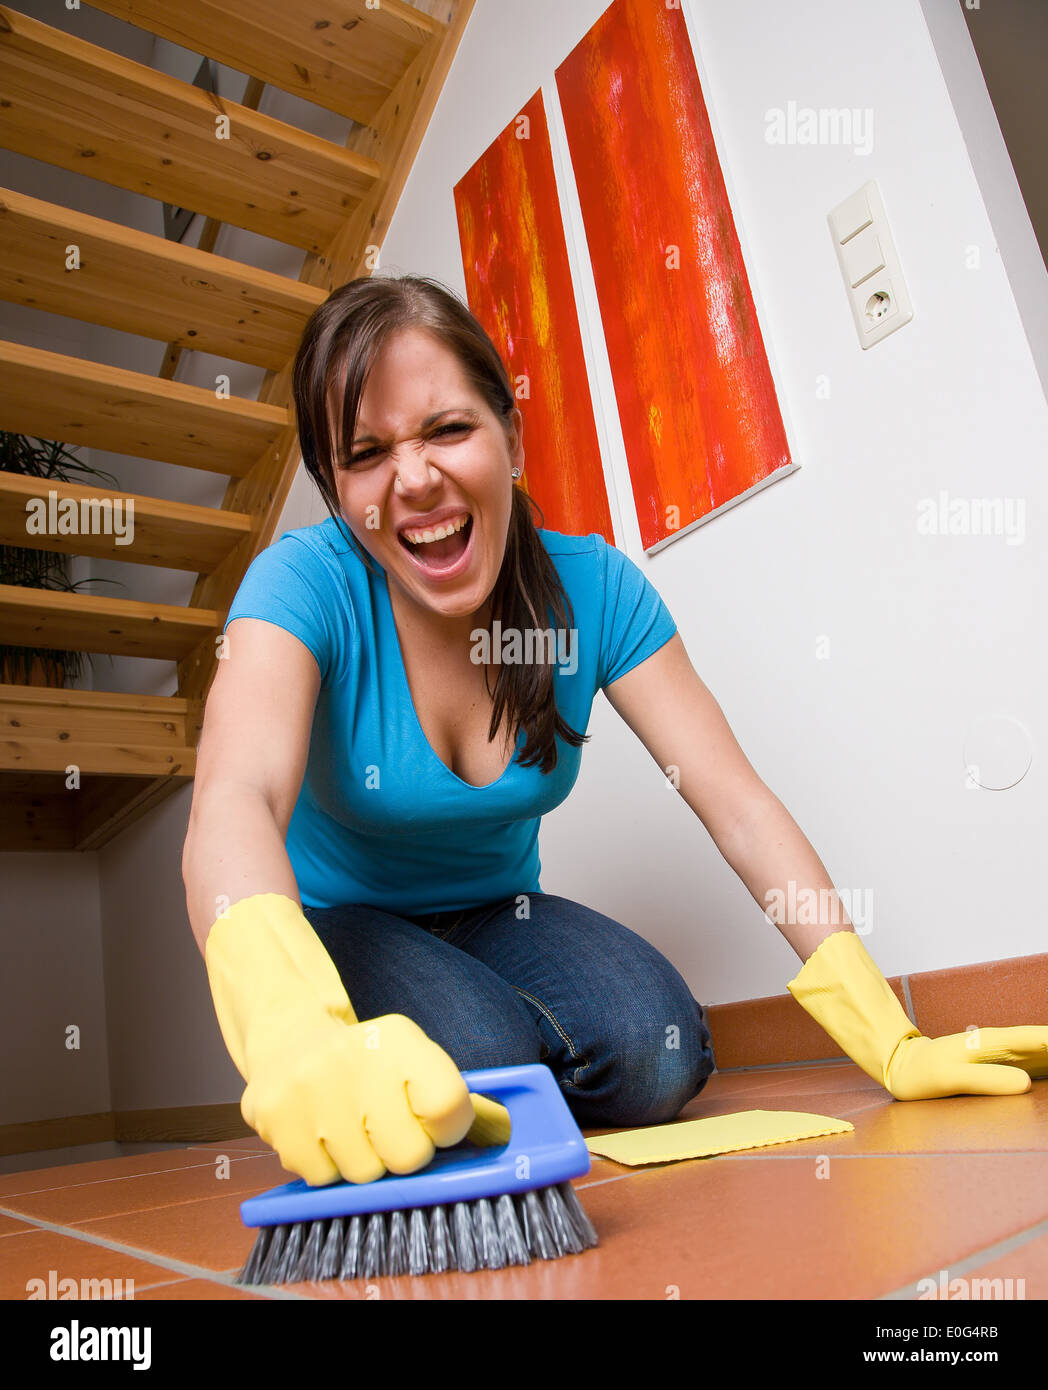 house cleaning work woman Stock Photo